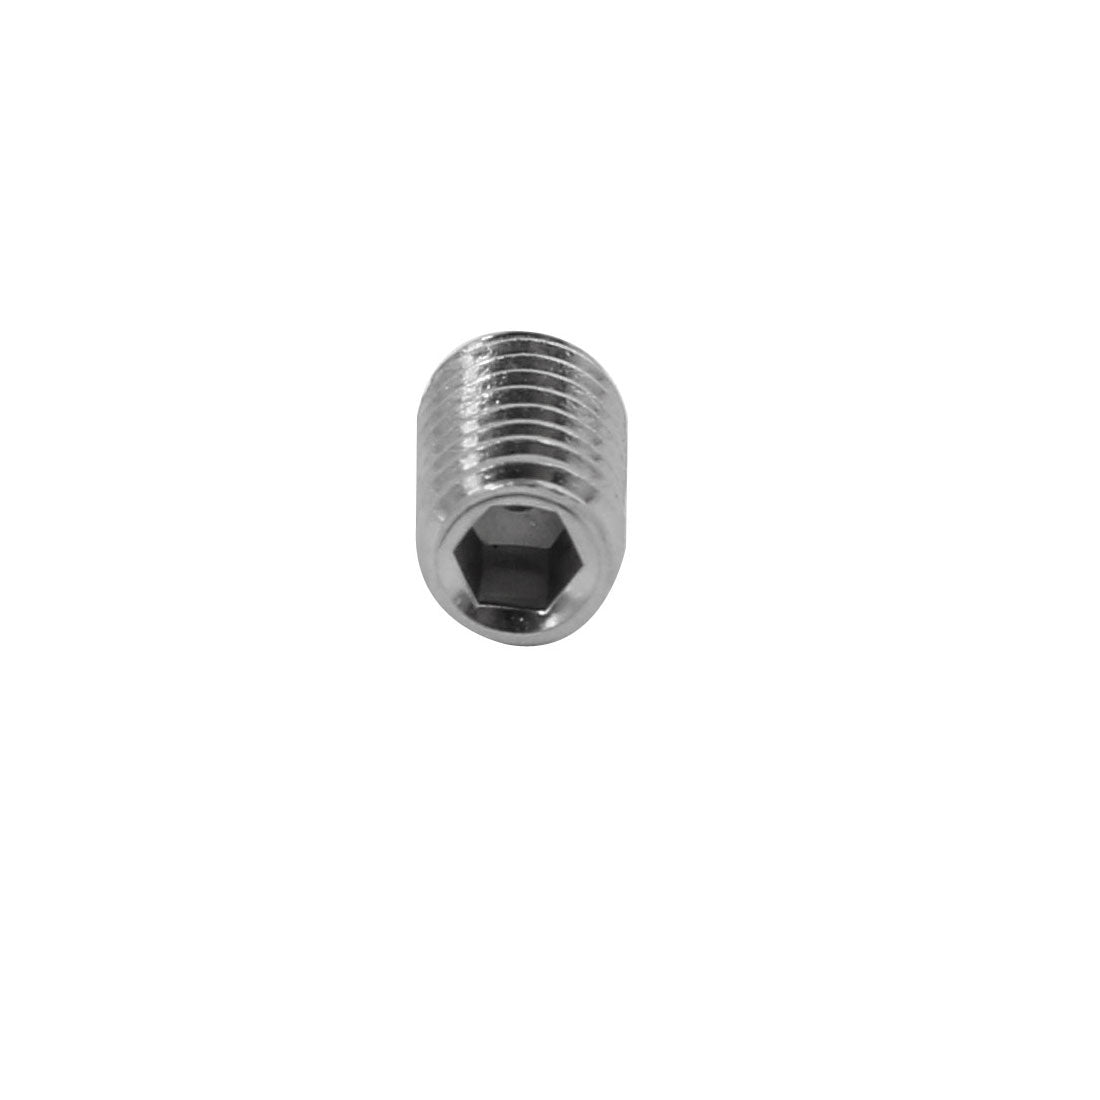 uxcell Uxcell 100 Pcs M5 x 8mm 304 Stainless Steel Hex Socket Drive Flat Point Grub Screw